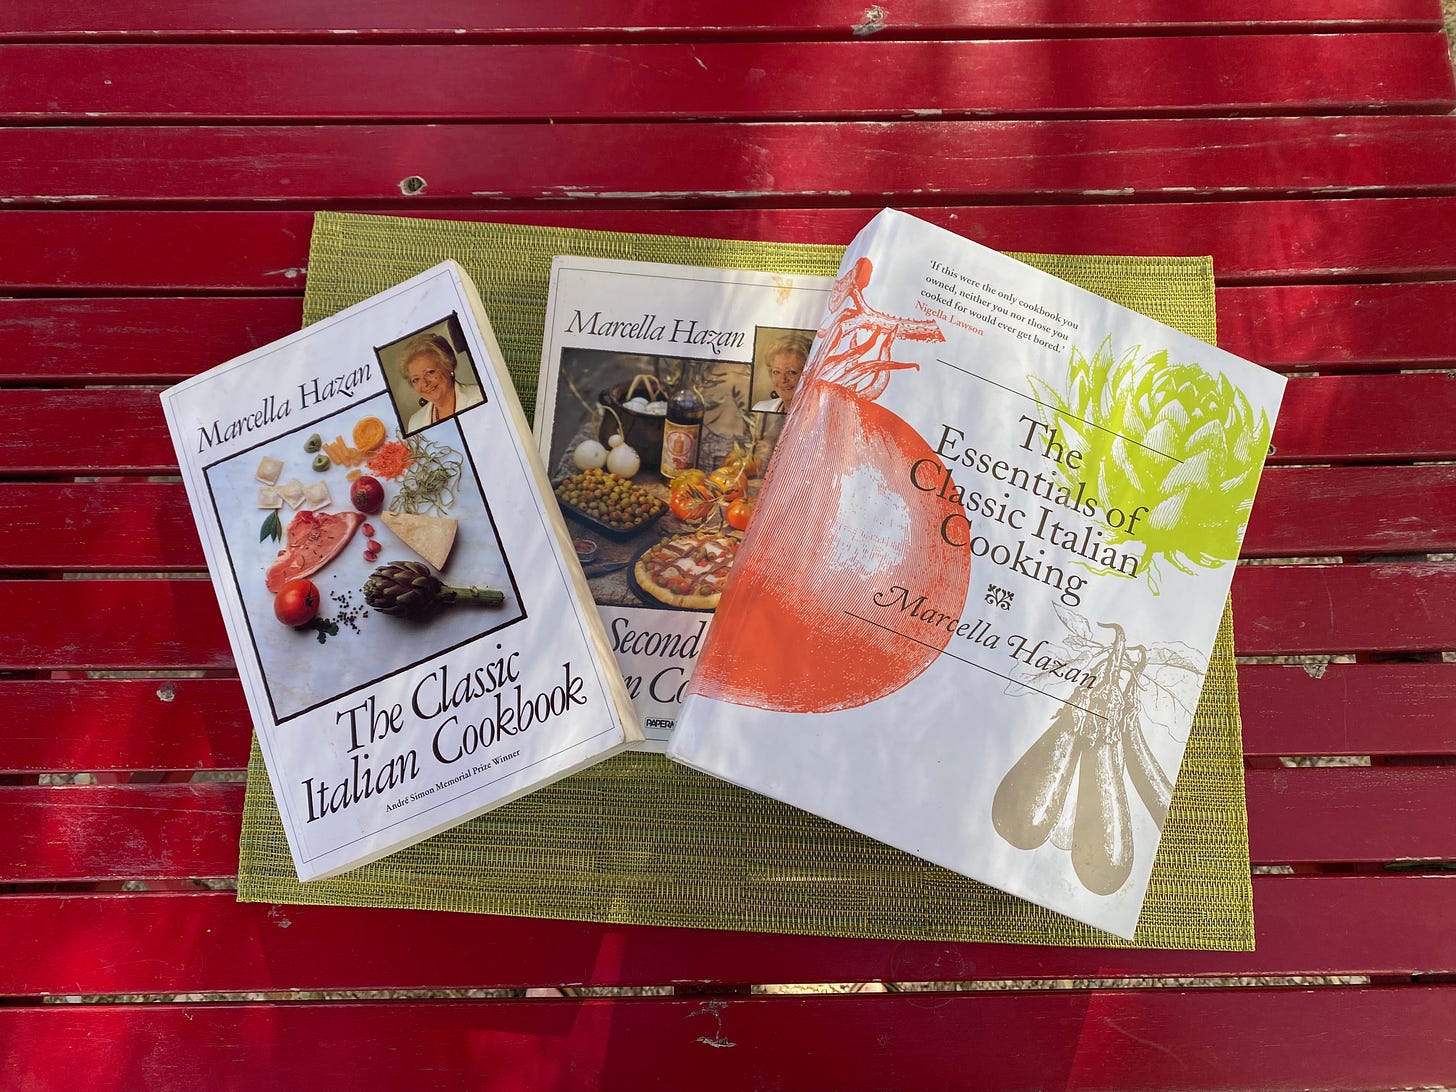 Picture of three books on a table: The Classic Italian Cookbook, The Second Classic Italian Cookbook and The Essentials of Classic Italian Cooking - all my Marcella Hazan